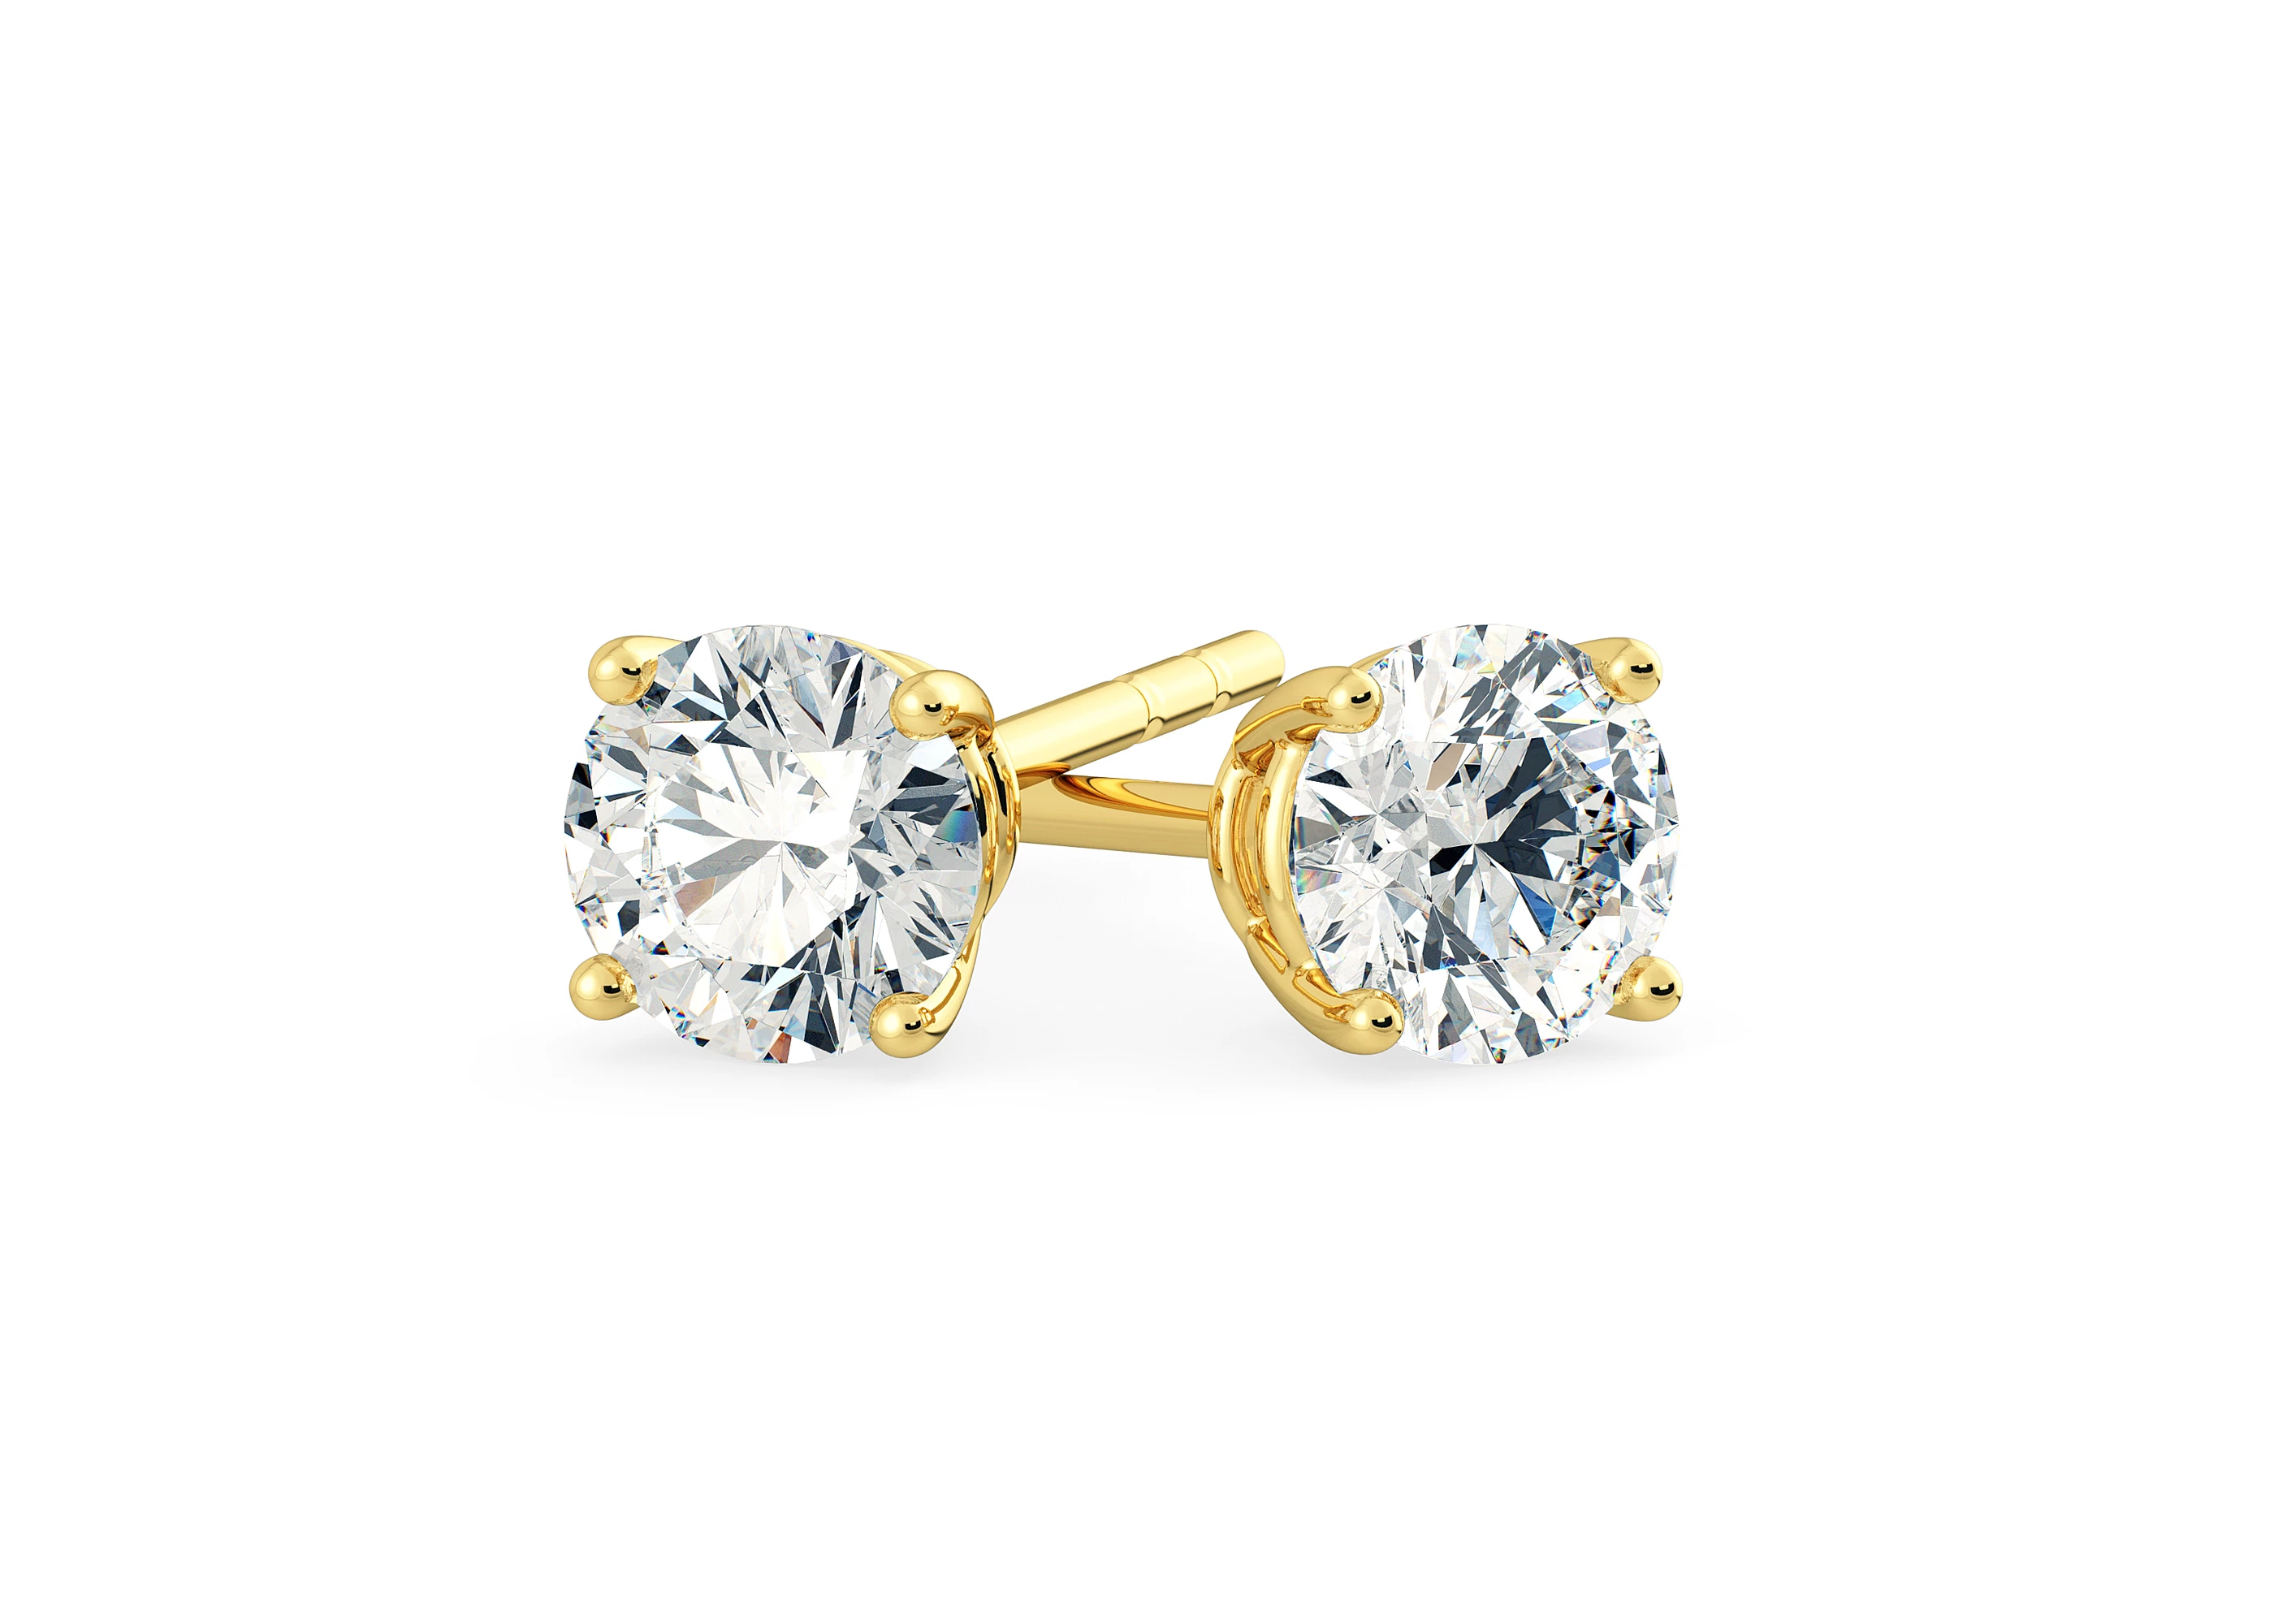 Two Carat Round Brilliant Diamond Stud Earrings in 18K Yellow Gold